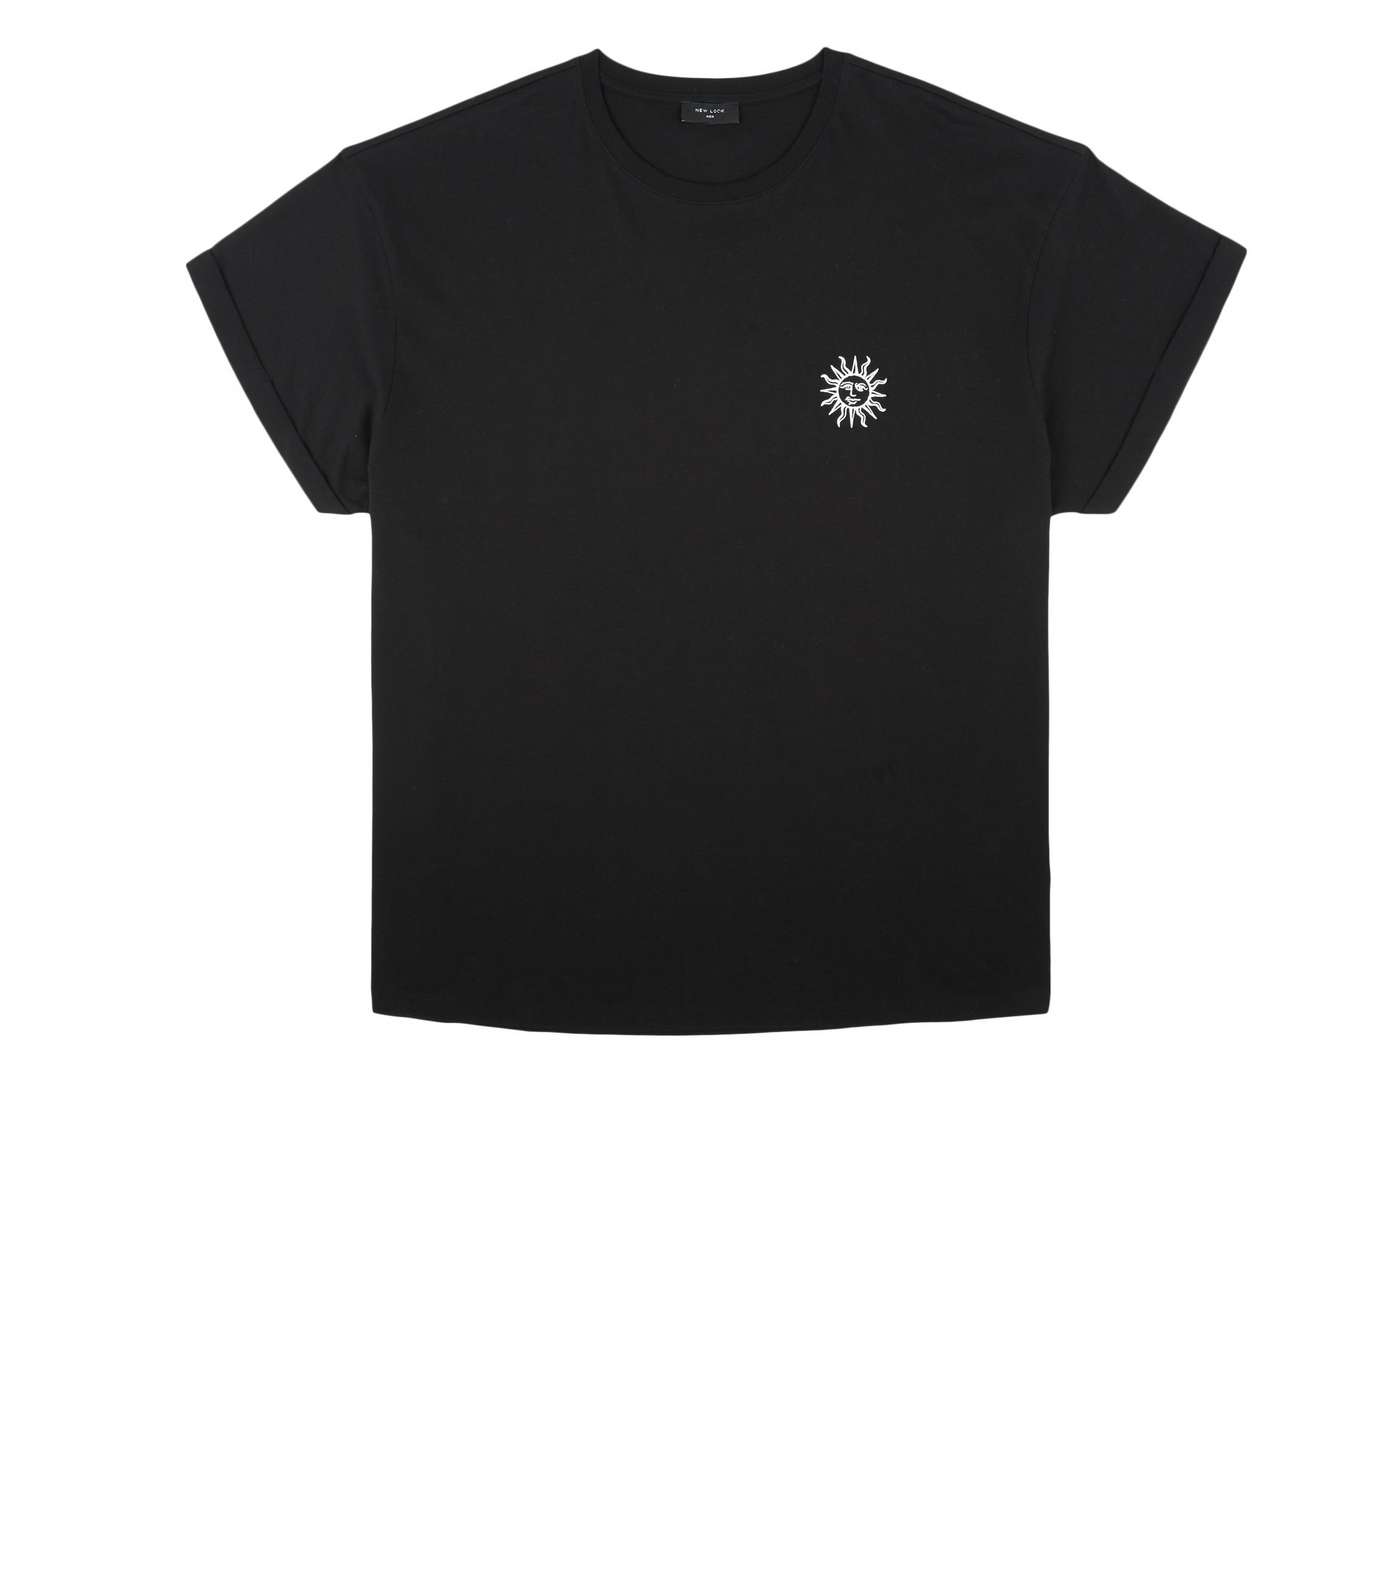 Plus Size Black Sun Embroidered T-Shirt Image 4